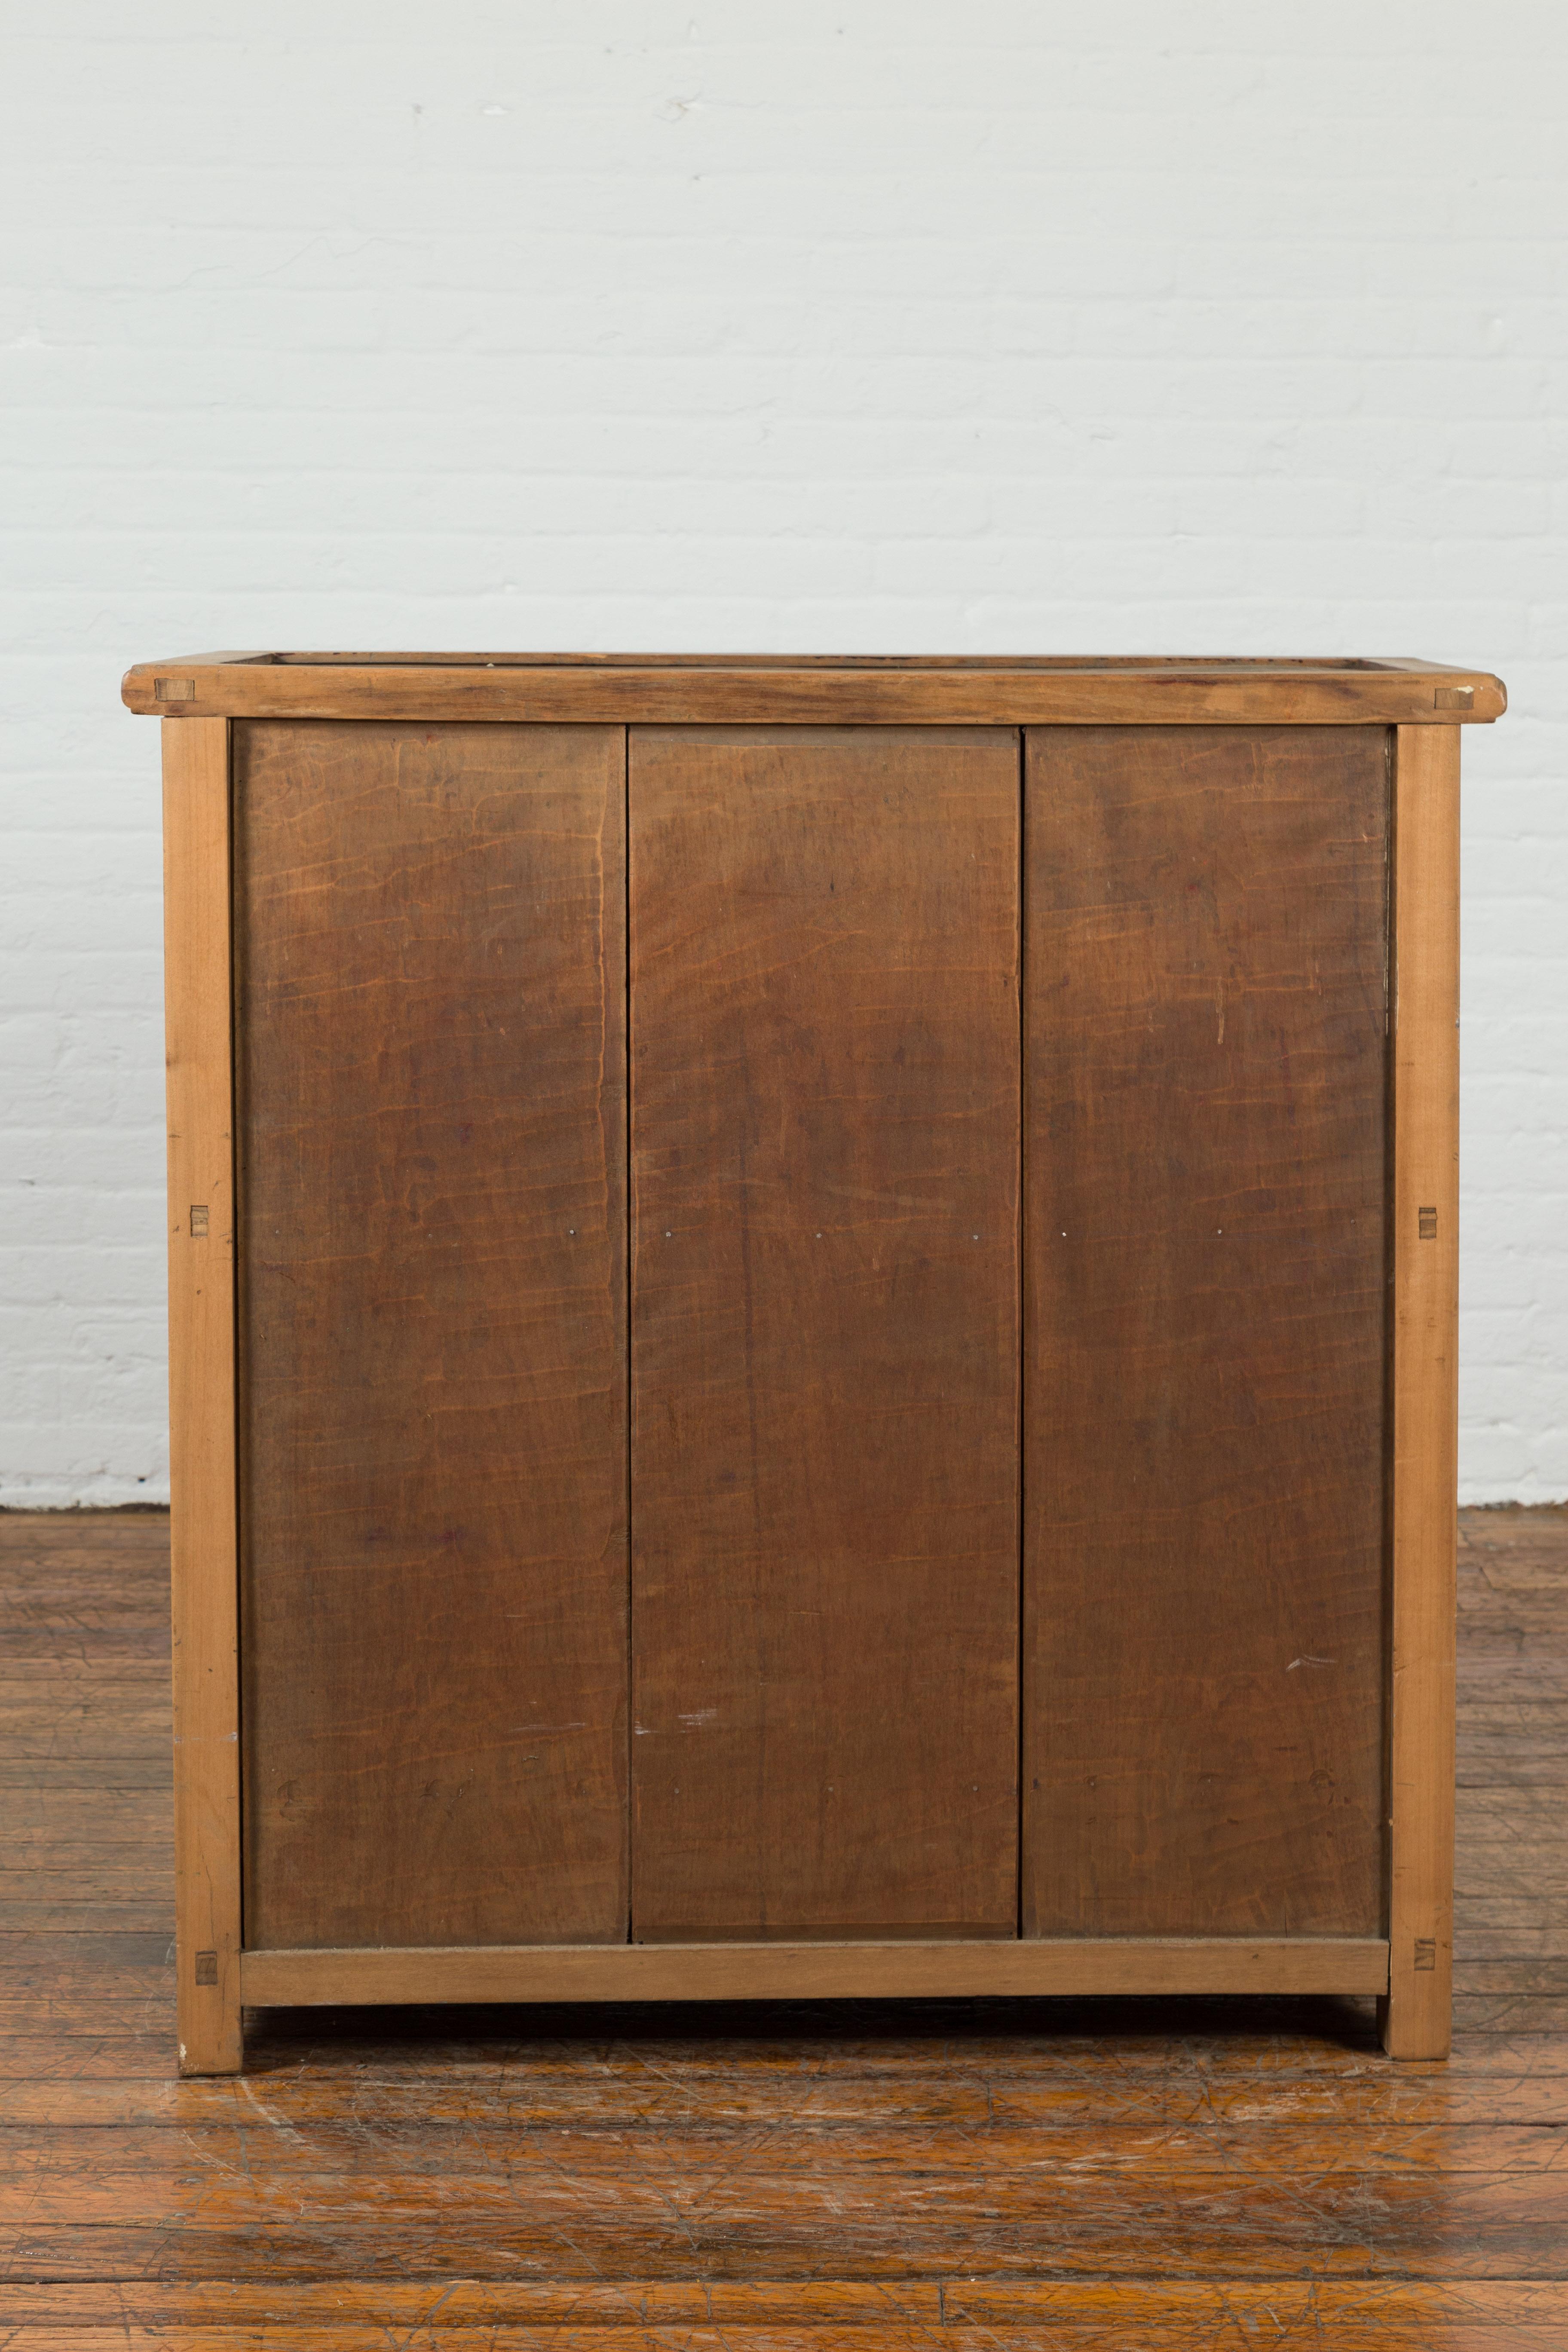 Chinese Vintage Natural Wood Finish Cabinet with Two Doors and Hidden Drawers For Sale 4